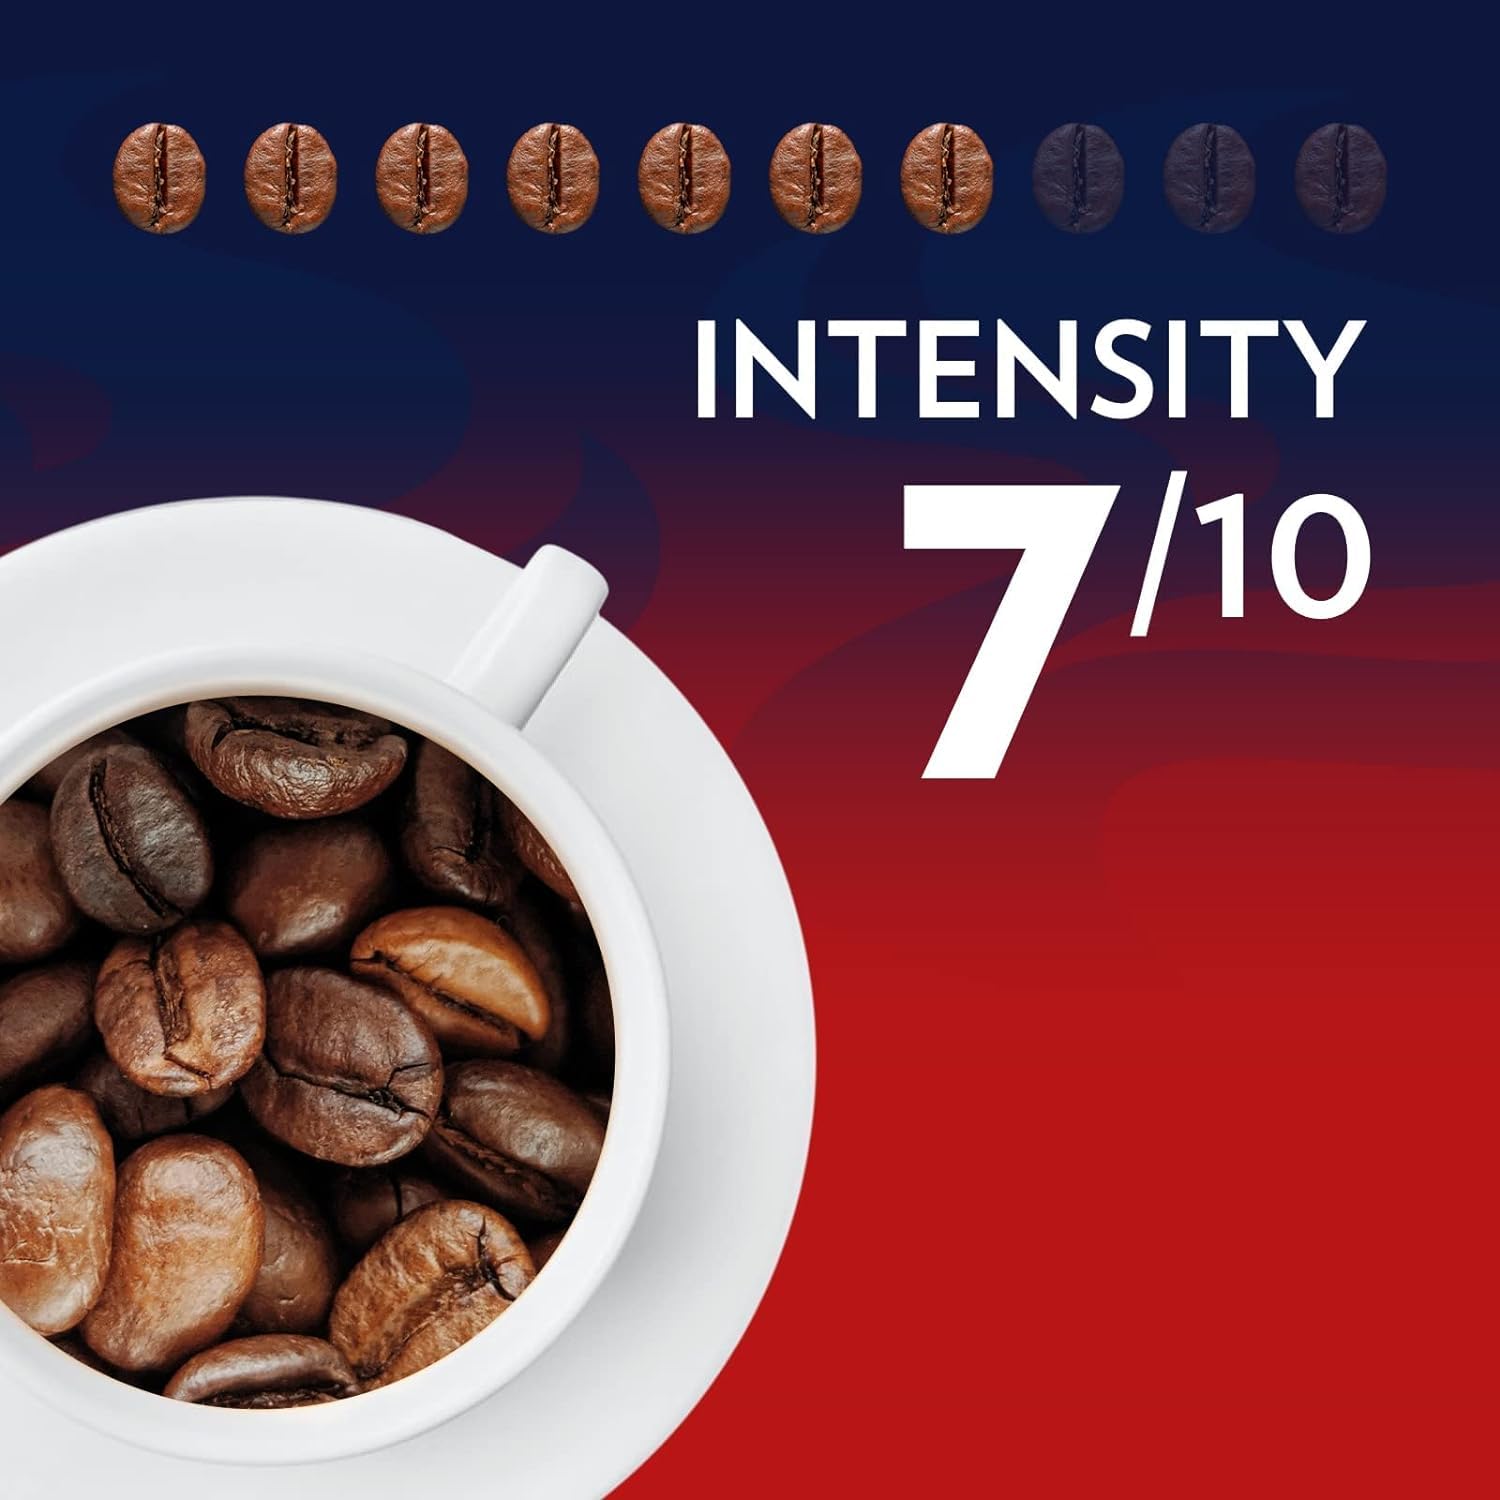 Lavazza Crema E Gusto Whole Bean Coffee 1 kg Bag, Authentic Italian, Blended and roasted in Italy, Full-bodied, creamy dark roast with spices notes : Everything Else